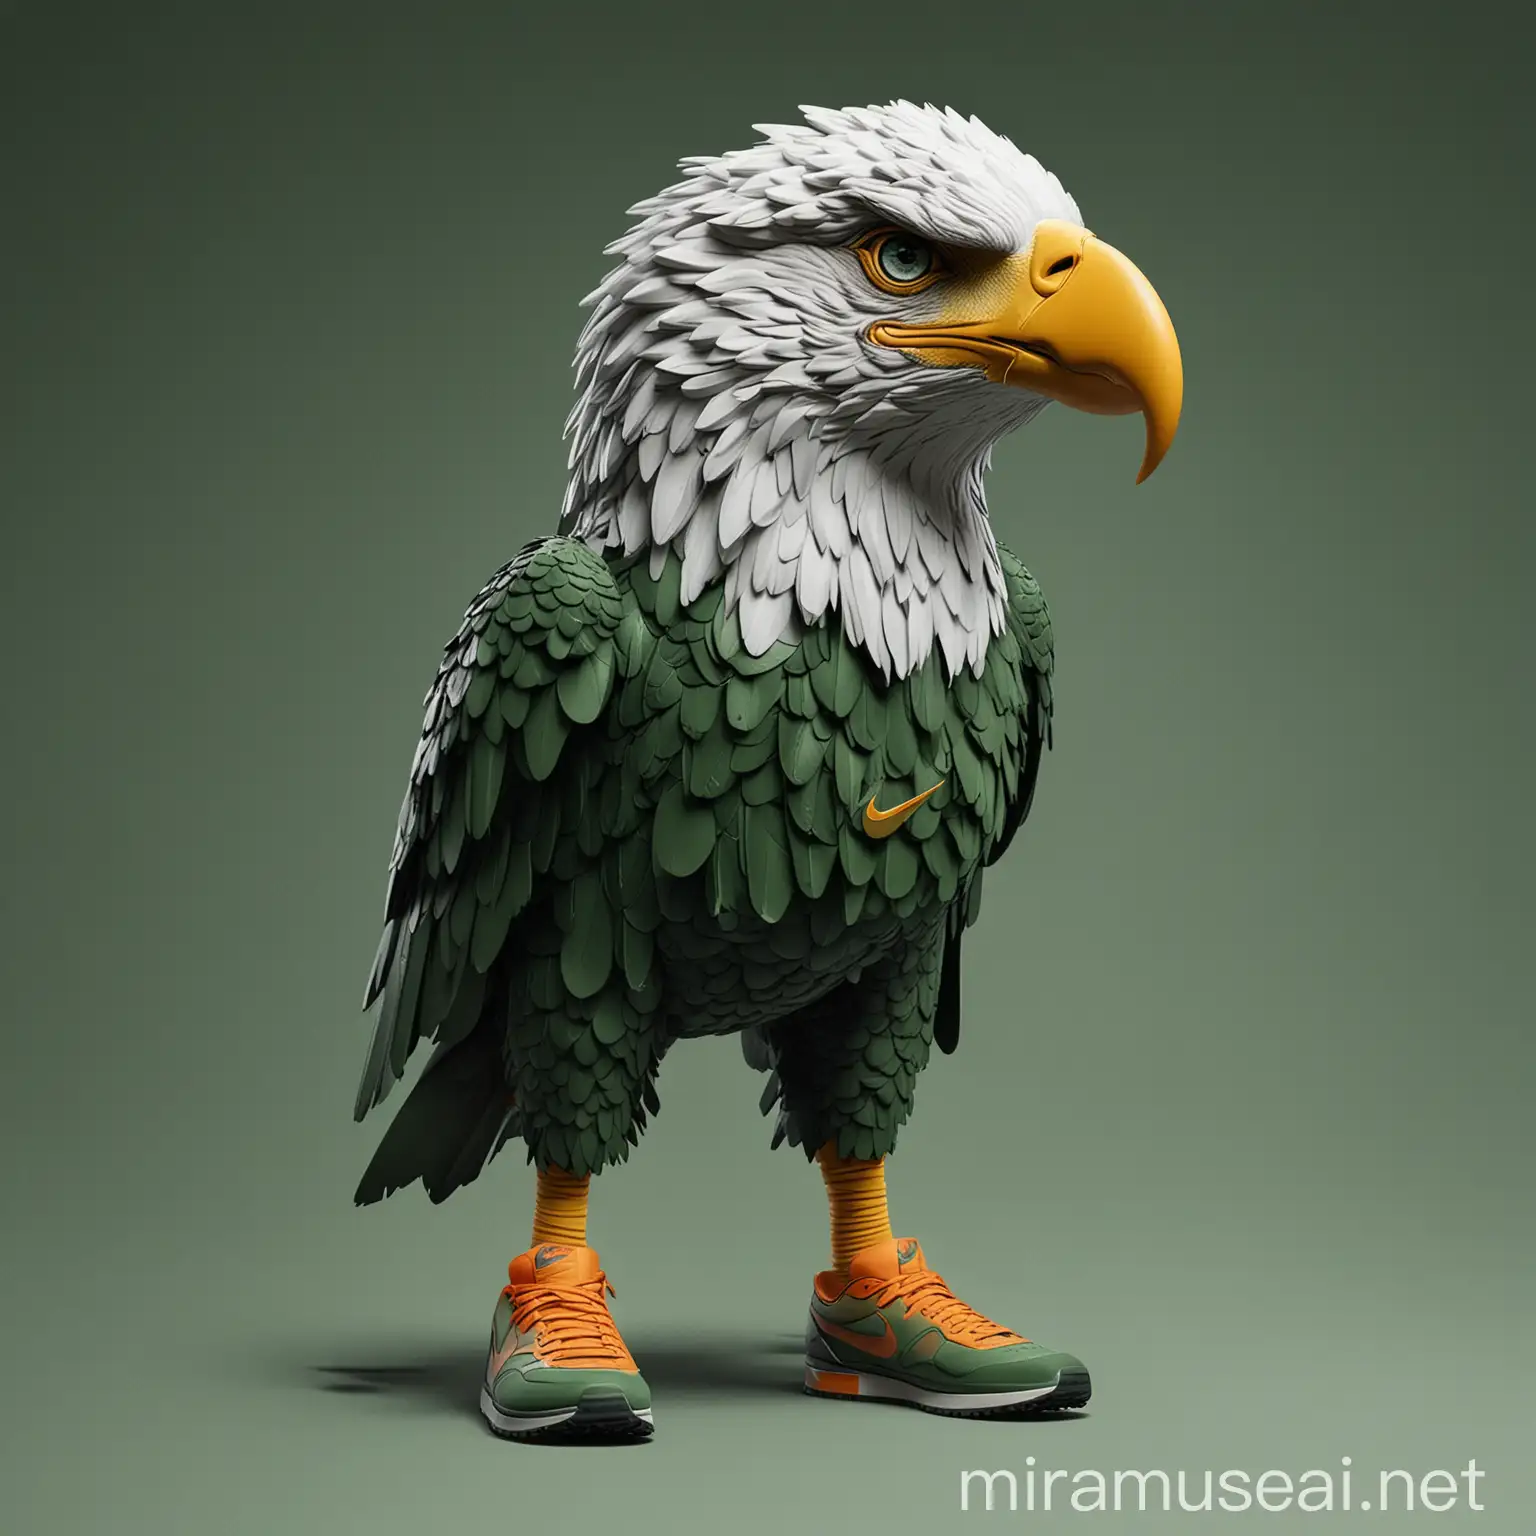 Futuristic Eagle Mascot Inspiring Innovation Athletic Excellence and Sustainability